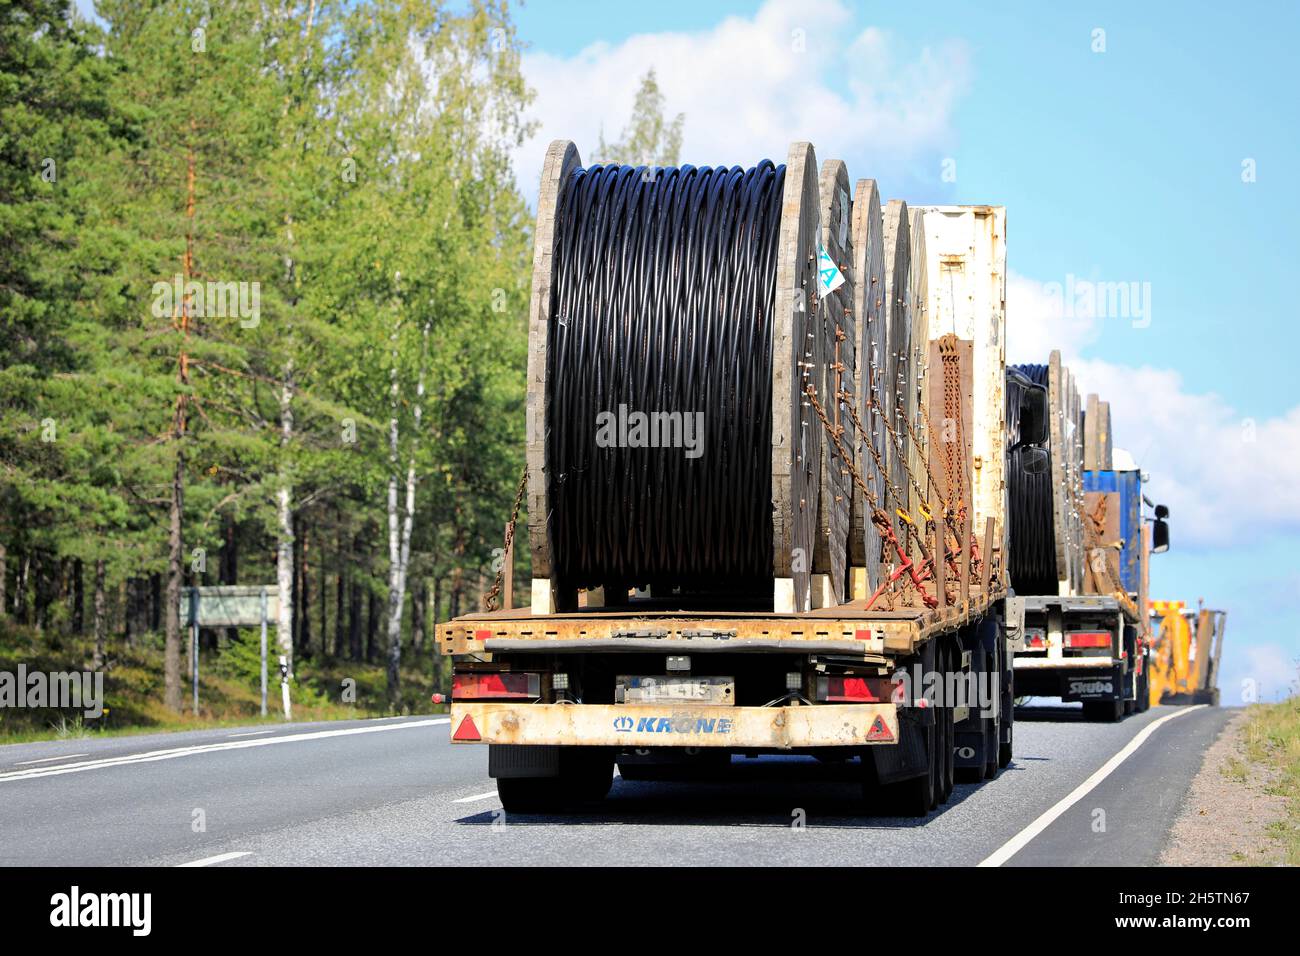 Flatbed trucks transport REKA power cable drums, secured with chains. Rear view. Highway 3, Ikaalinen, Finland. August 12, 2021. Stock Photo